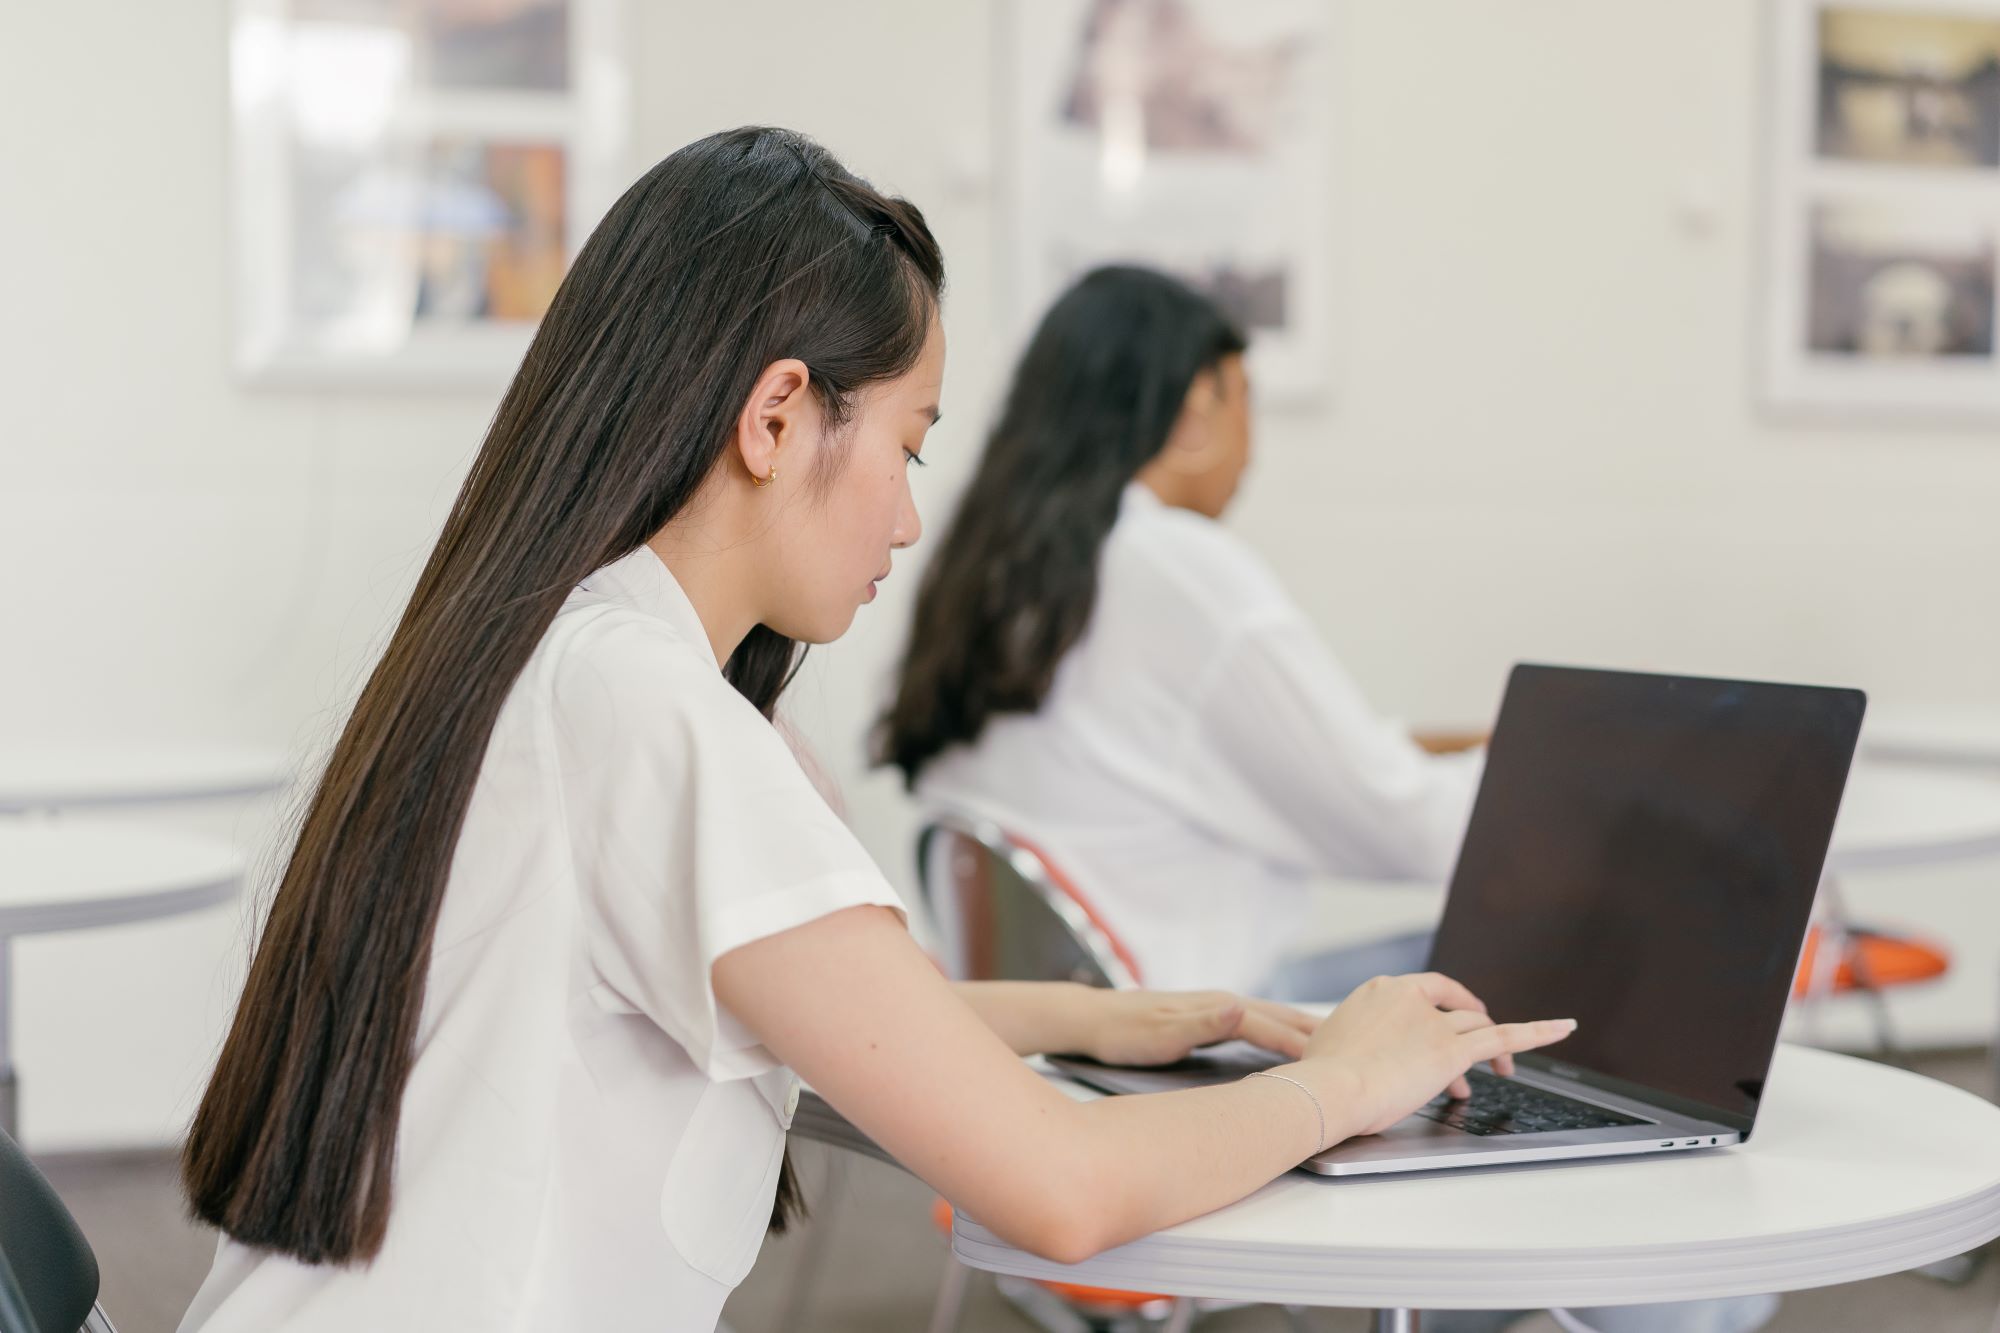 A student uses a laptop in a classroom